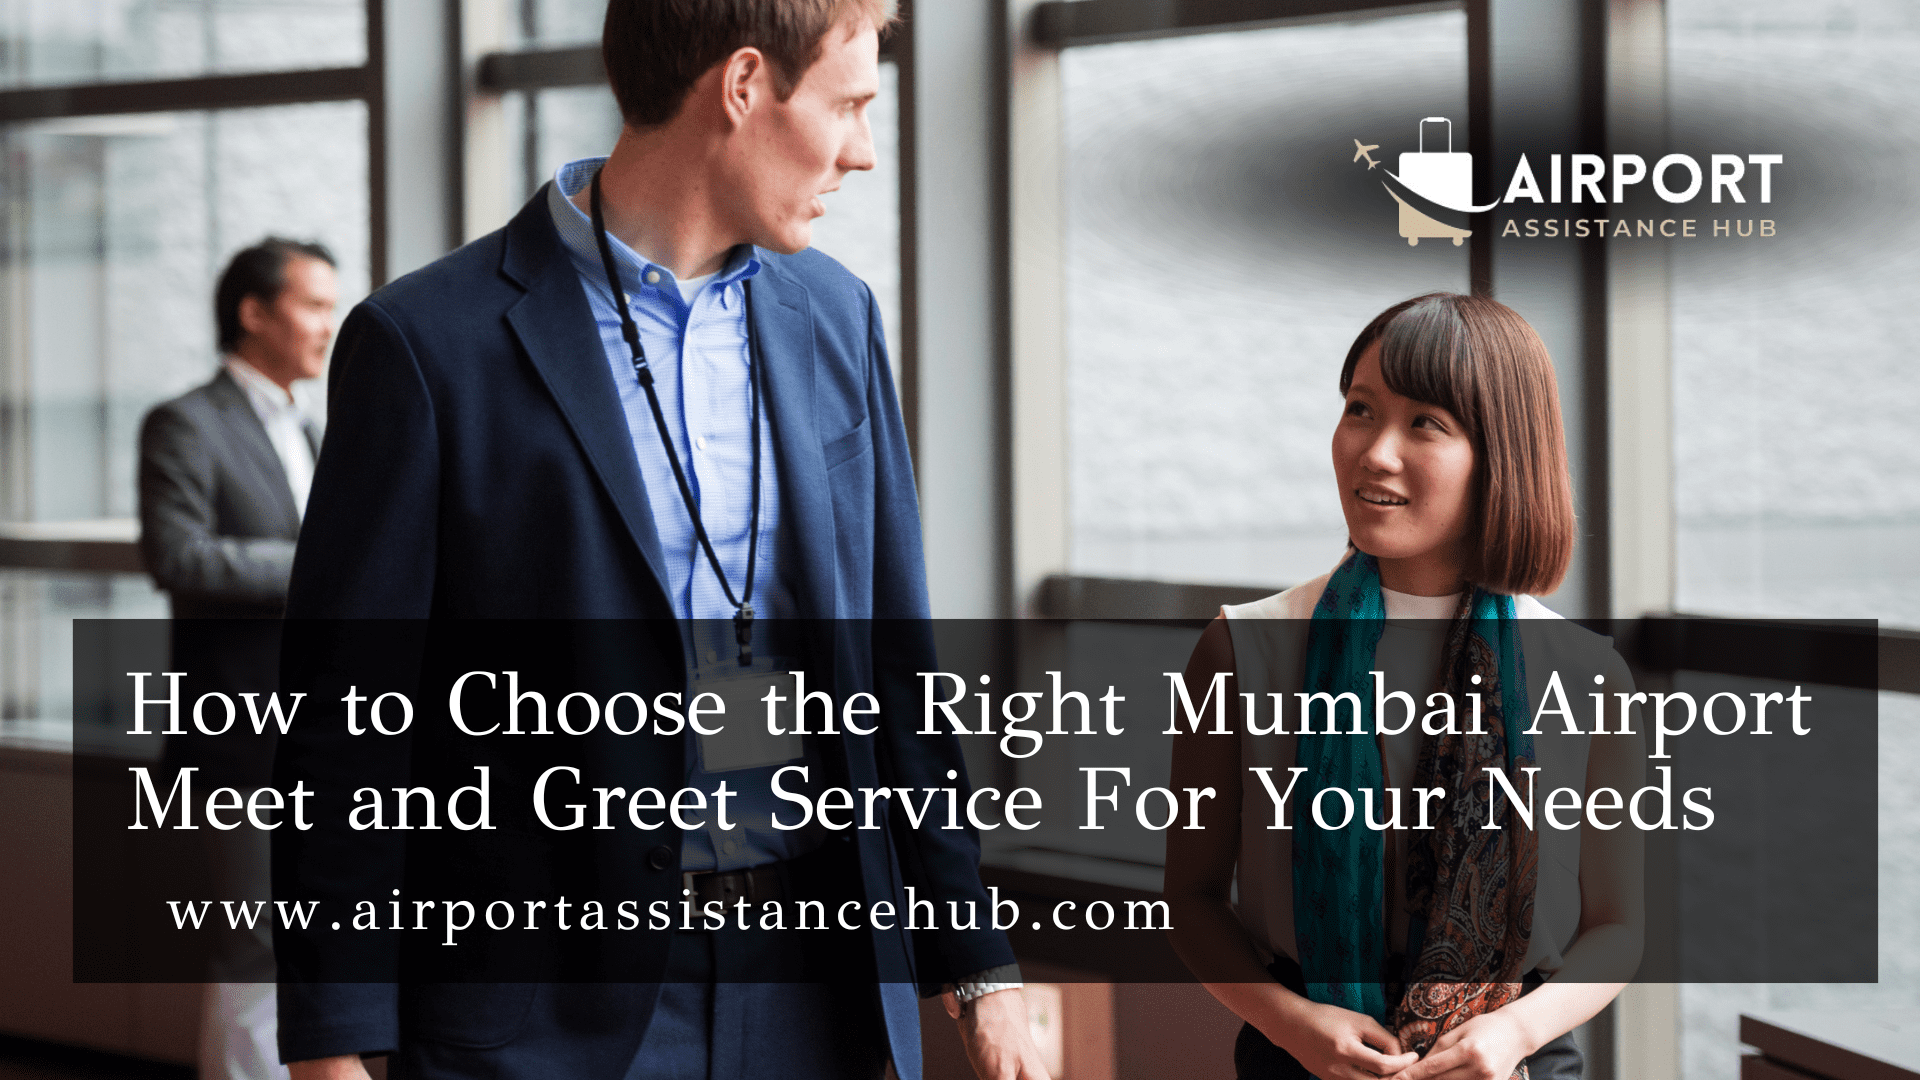 How to Choose the Right Mumbai Airport Meet and Greet Service For Your Needs